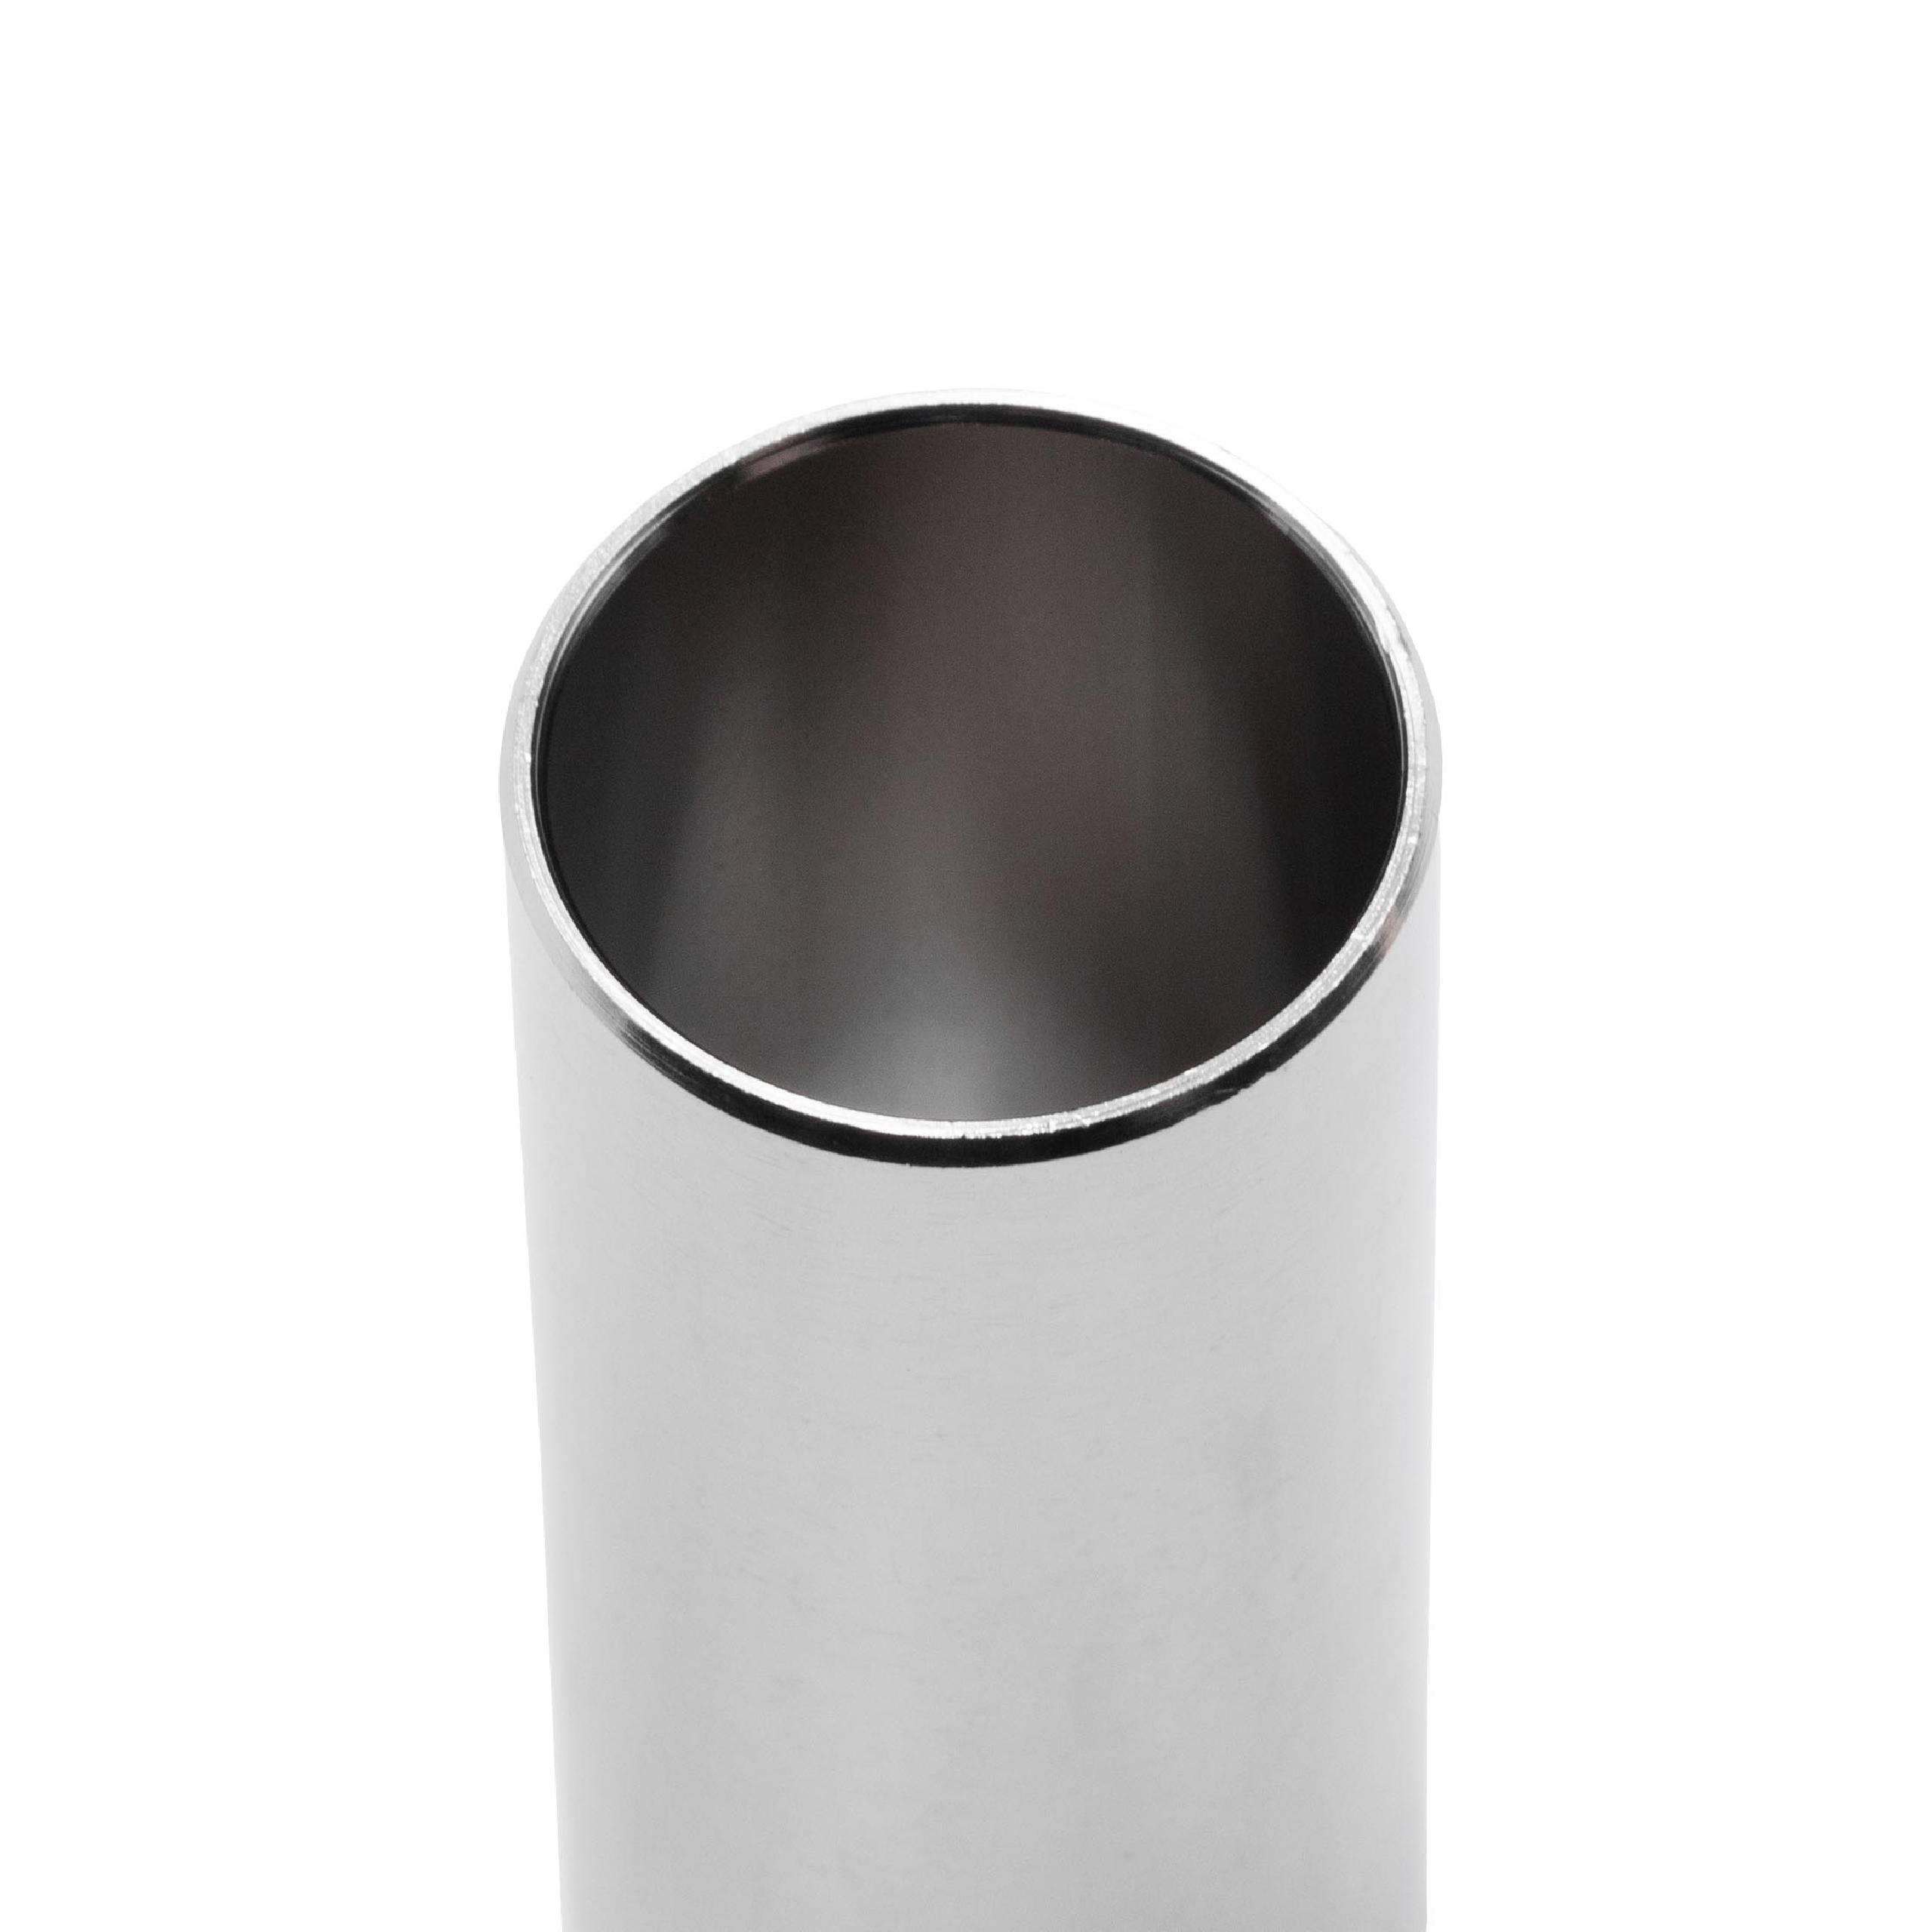 Guitar Slide 59.6mm stainless steel - Solid, Secure Hold